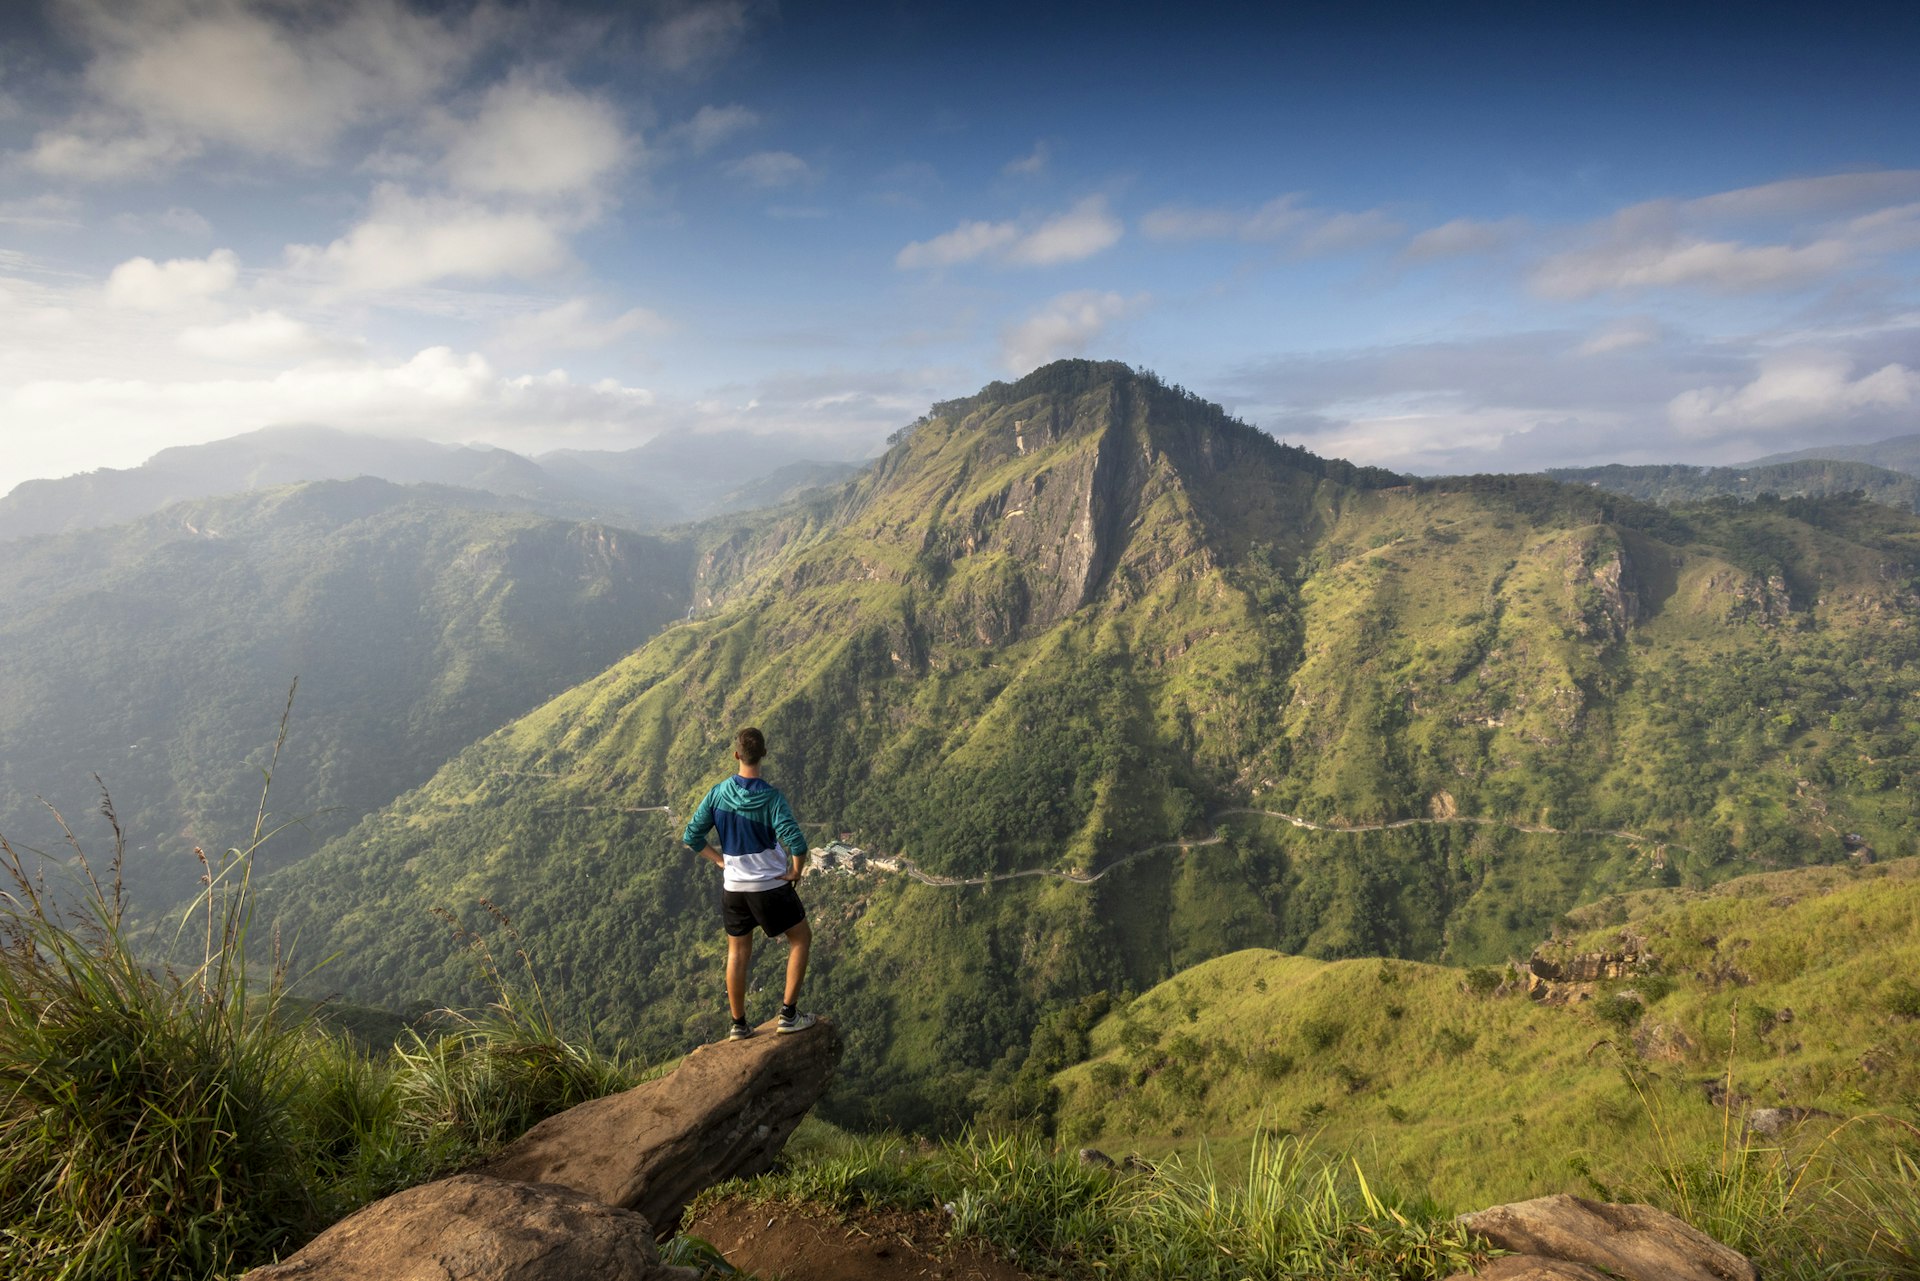 A man stands on a peak looking towards another distinctive hill in a lush green region